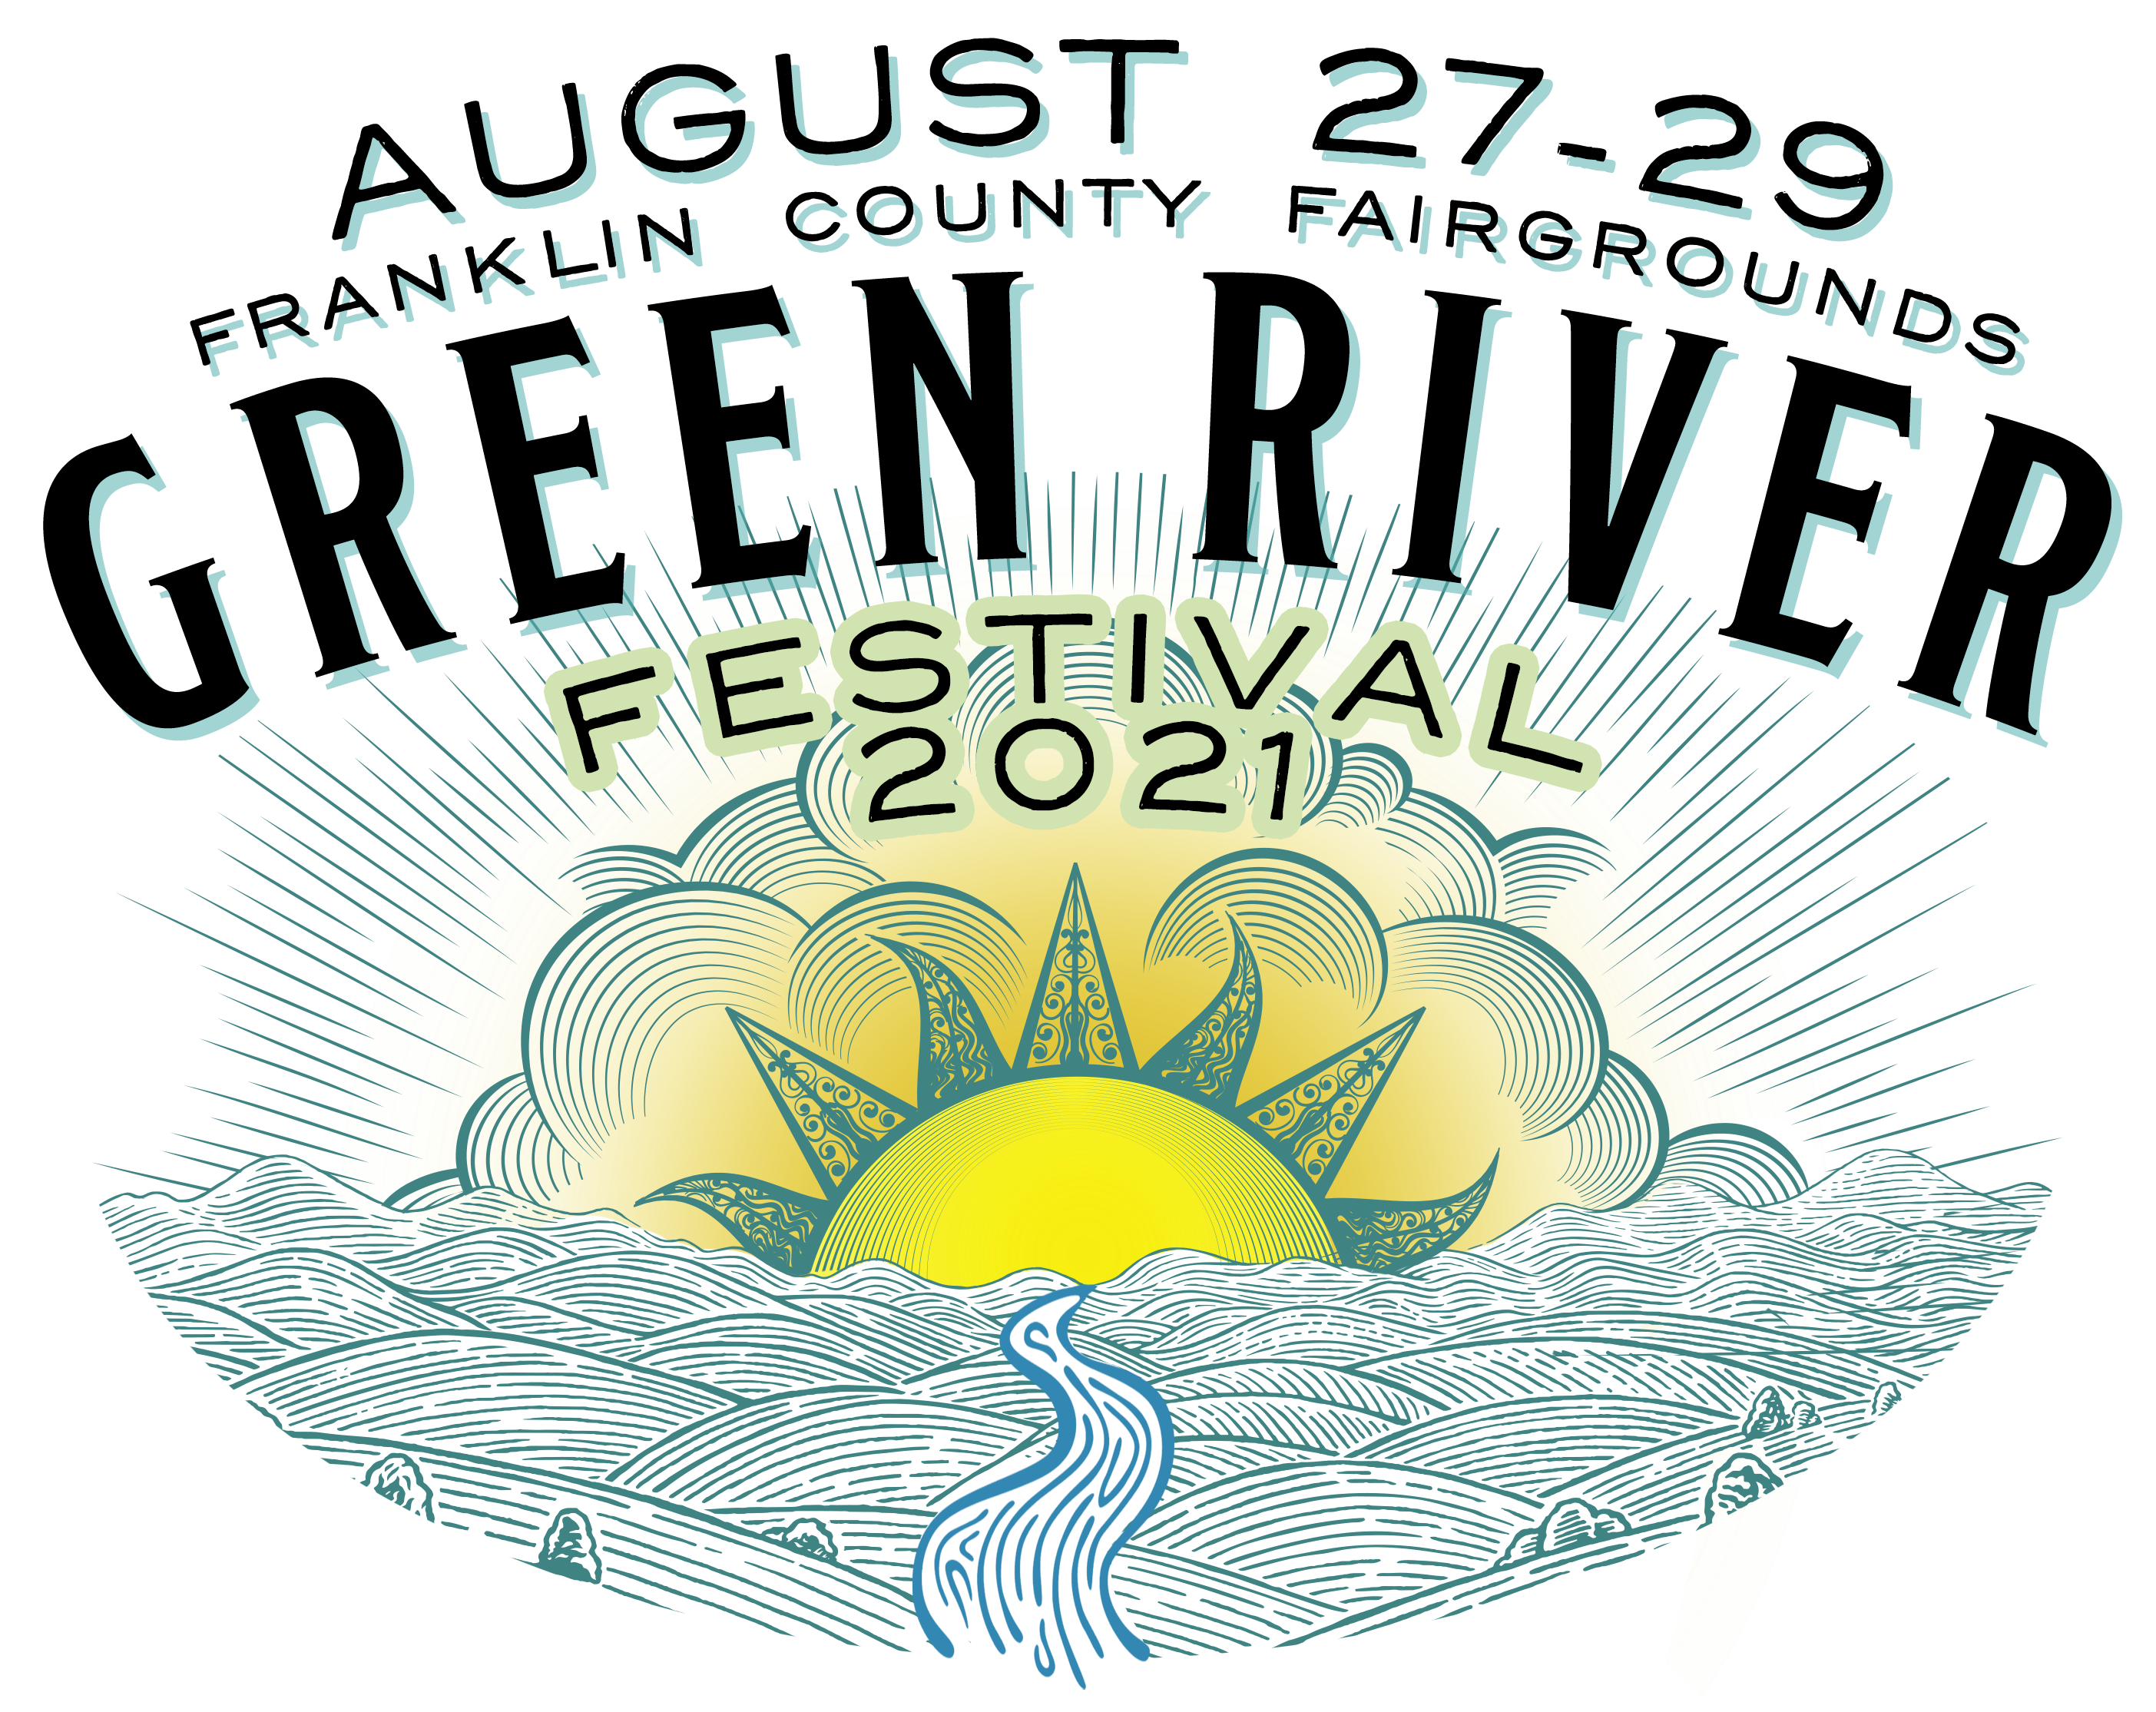 35TH ANNUAL GREEN RIVER FESTIVAL ANNOUNCES FIRST ARTISTS